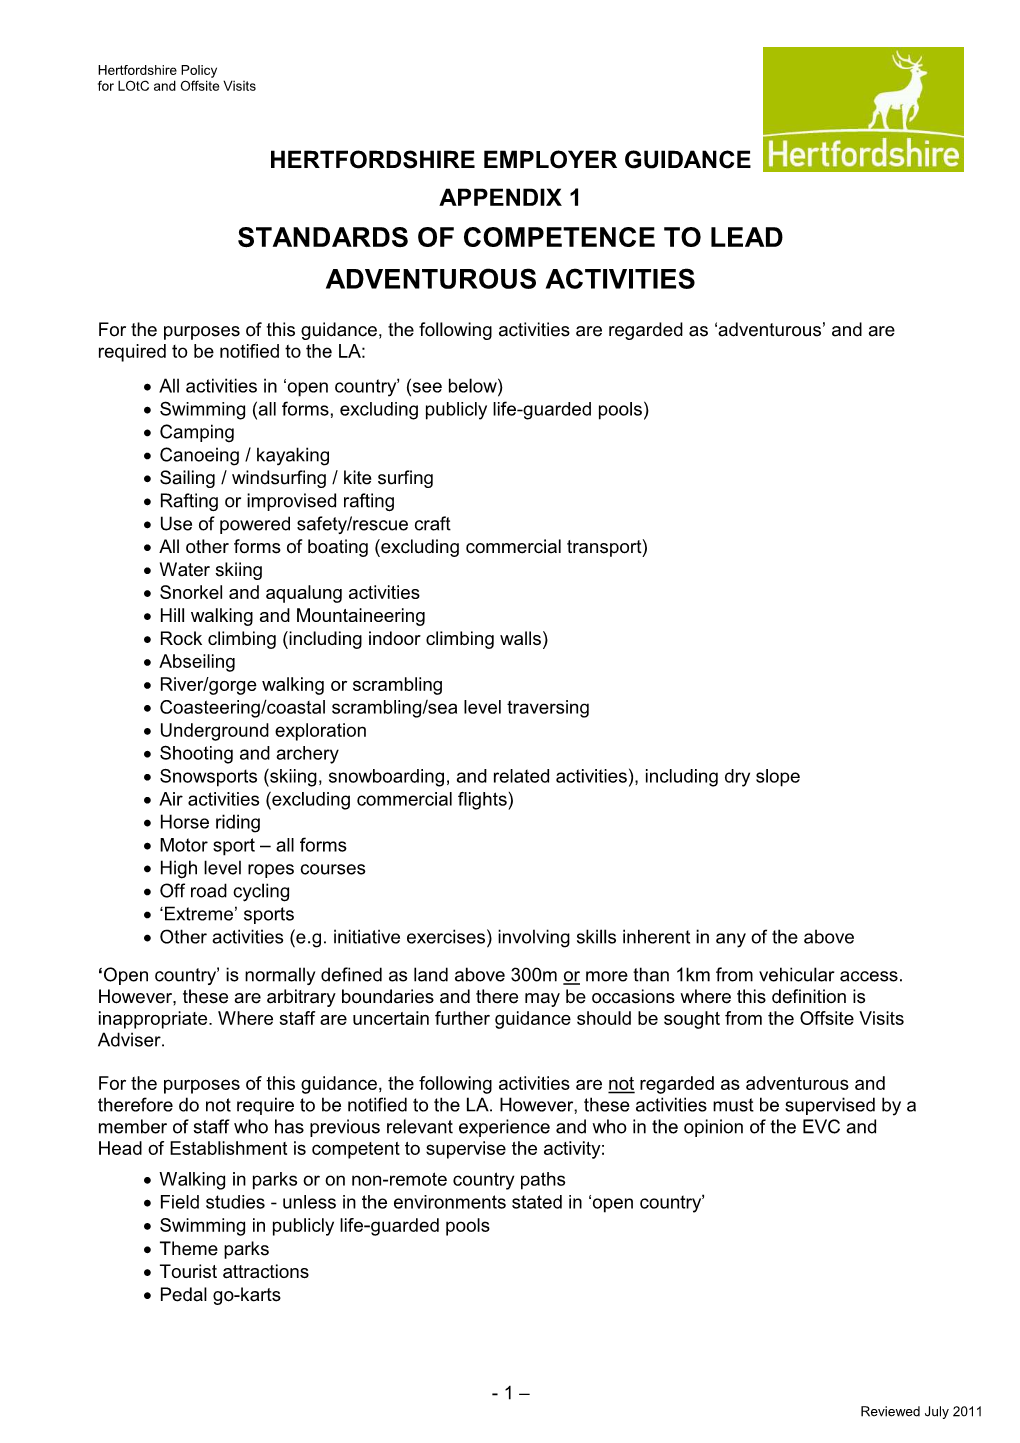 Standards of Competence to Lead Adventurous Activities